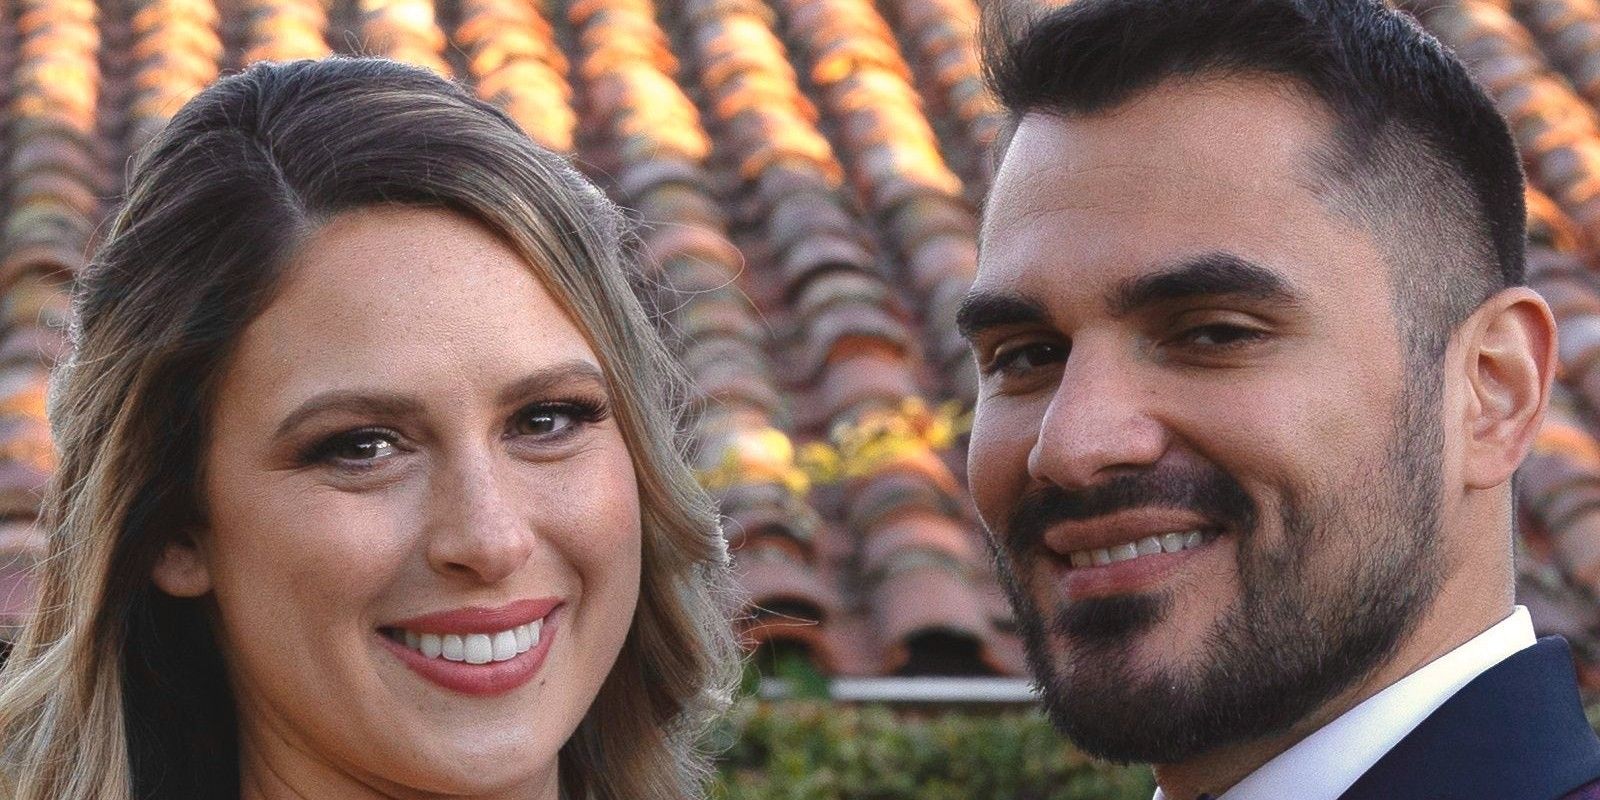 Lindy and Miguel Married at First Sight posing outside in wedding outfits CROPPED